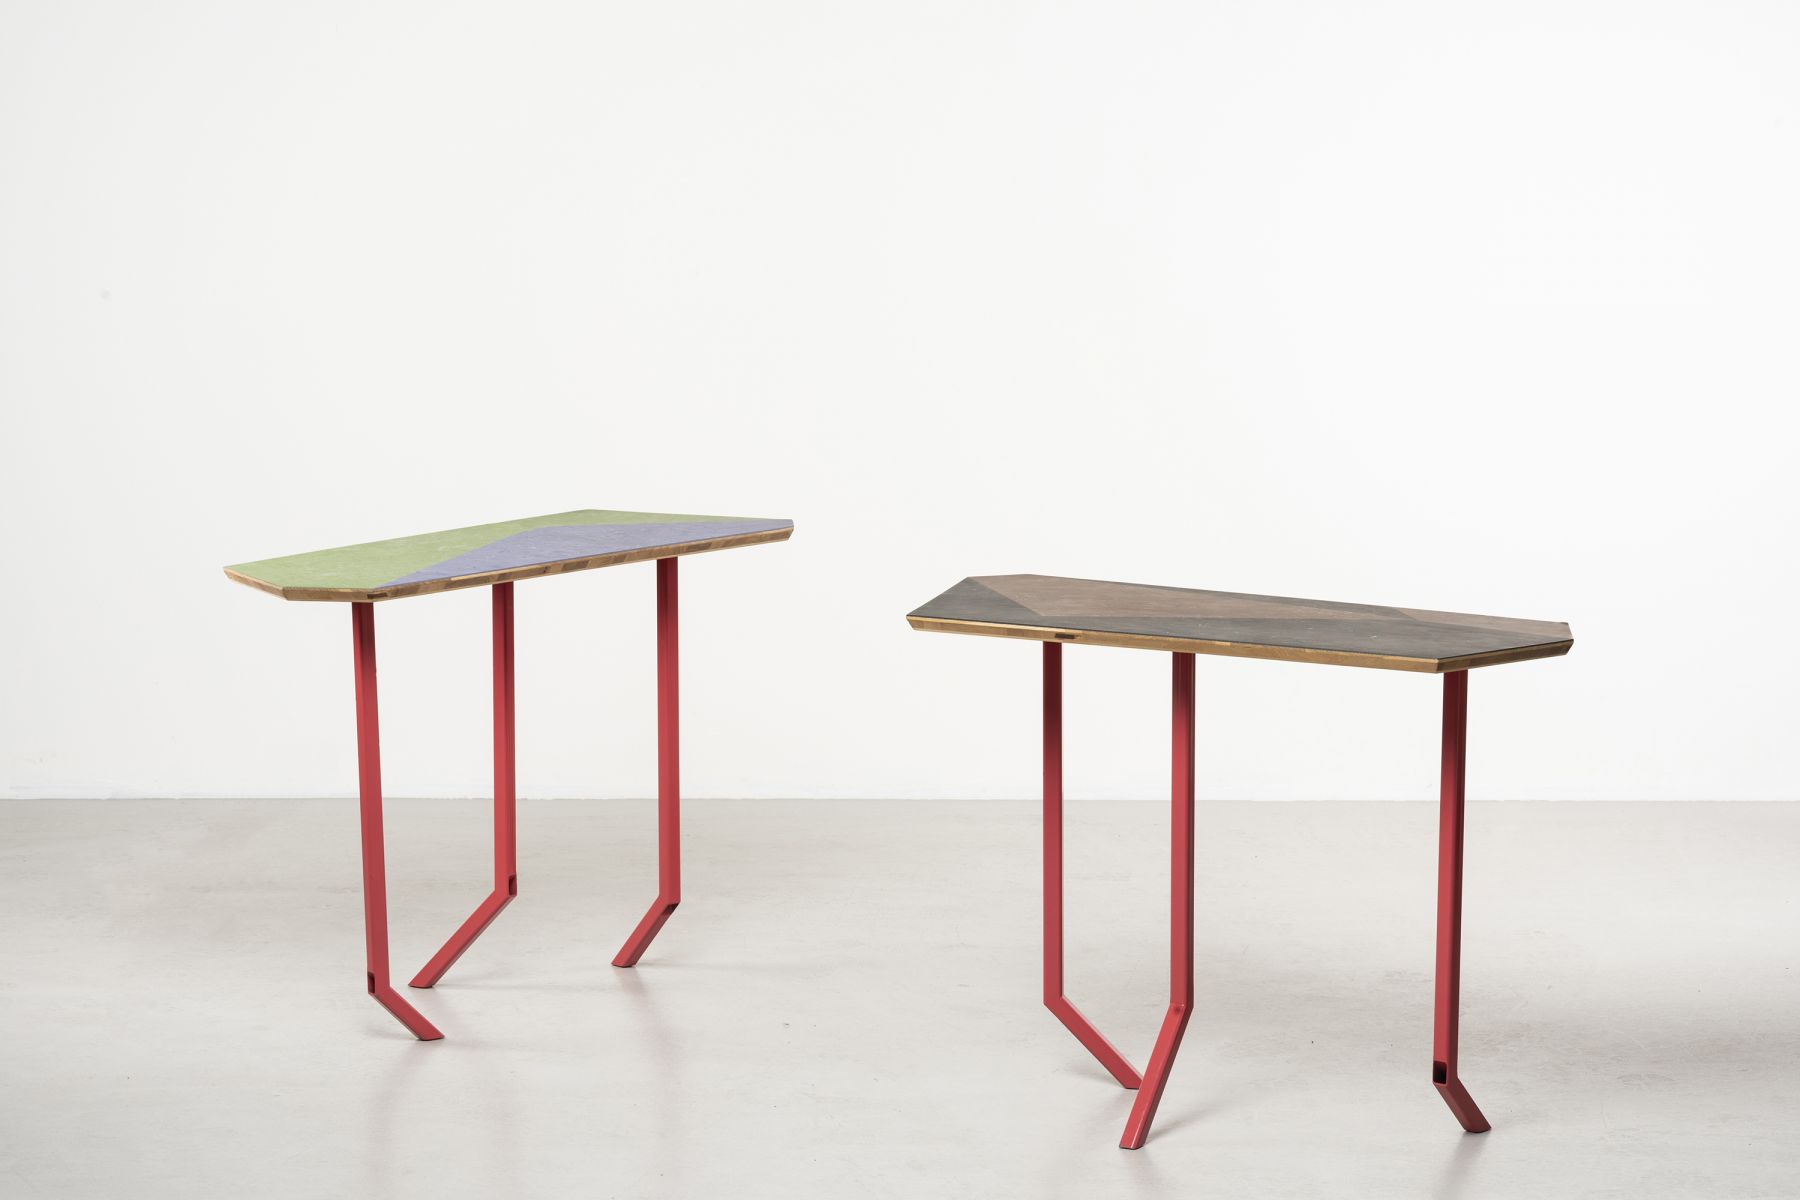 Two Off‐Cut tables Martino Gamper pic-1